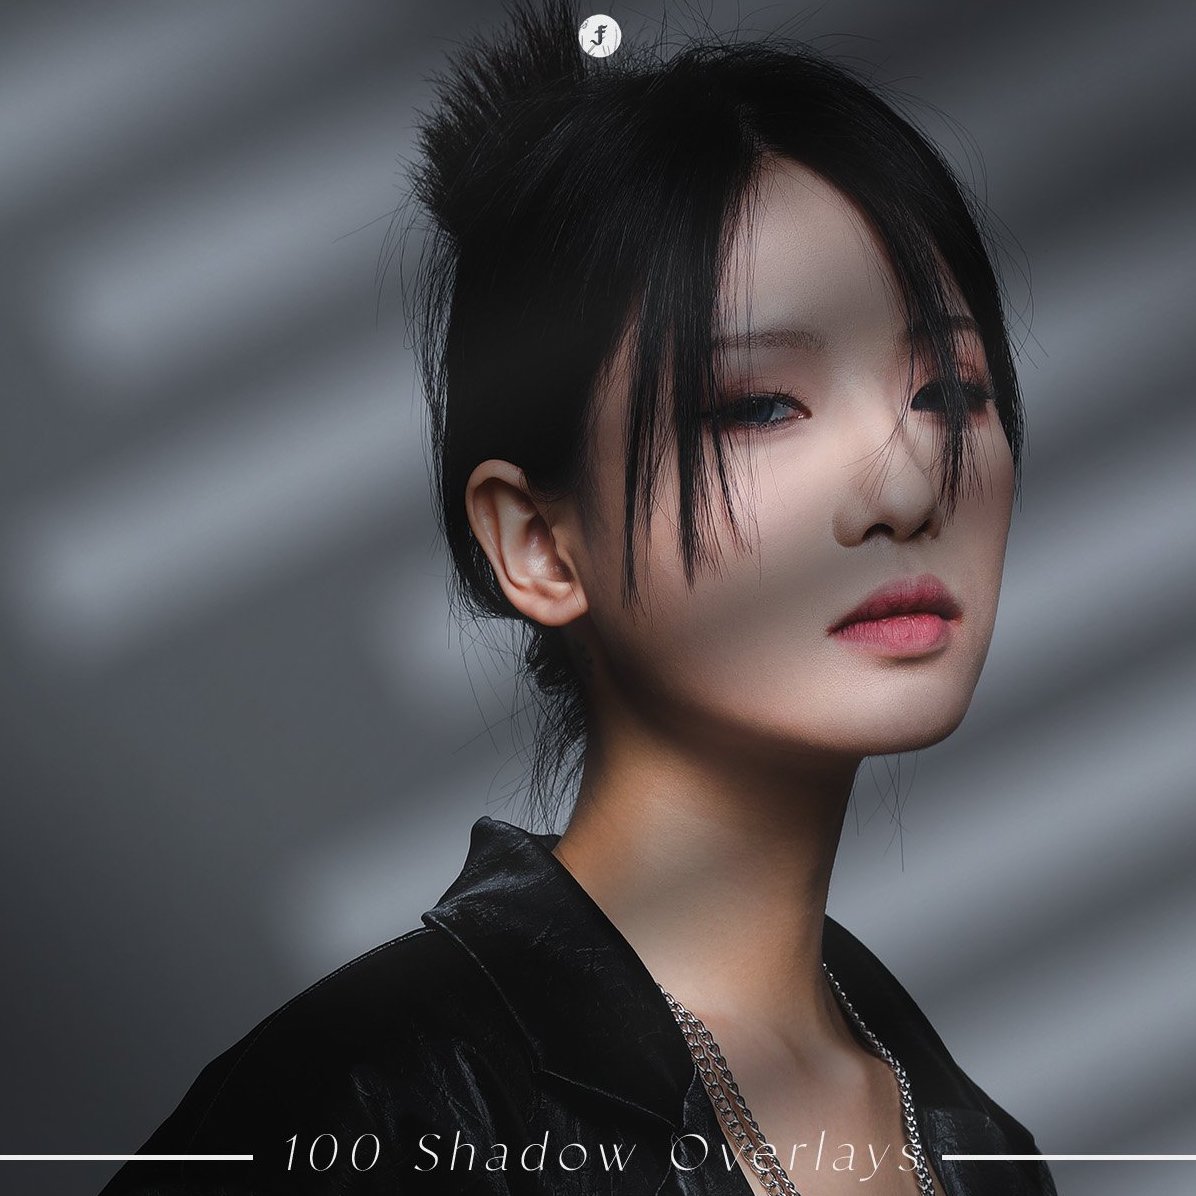 100 Shadow Photo Overlays covers.